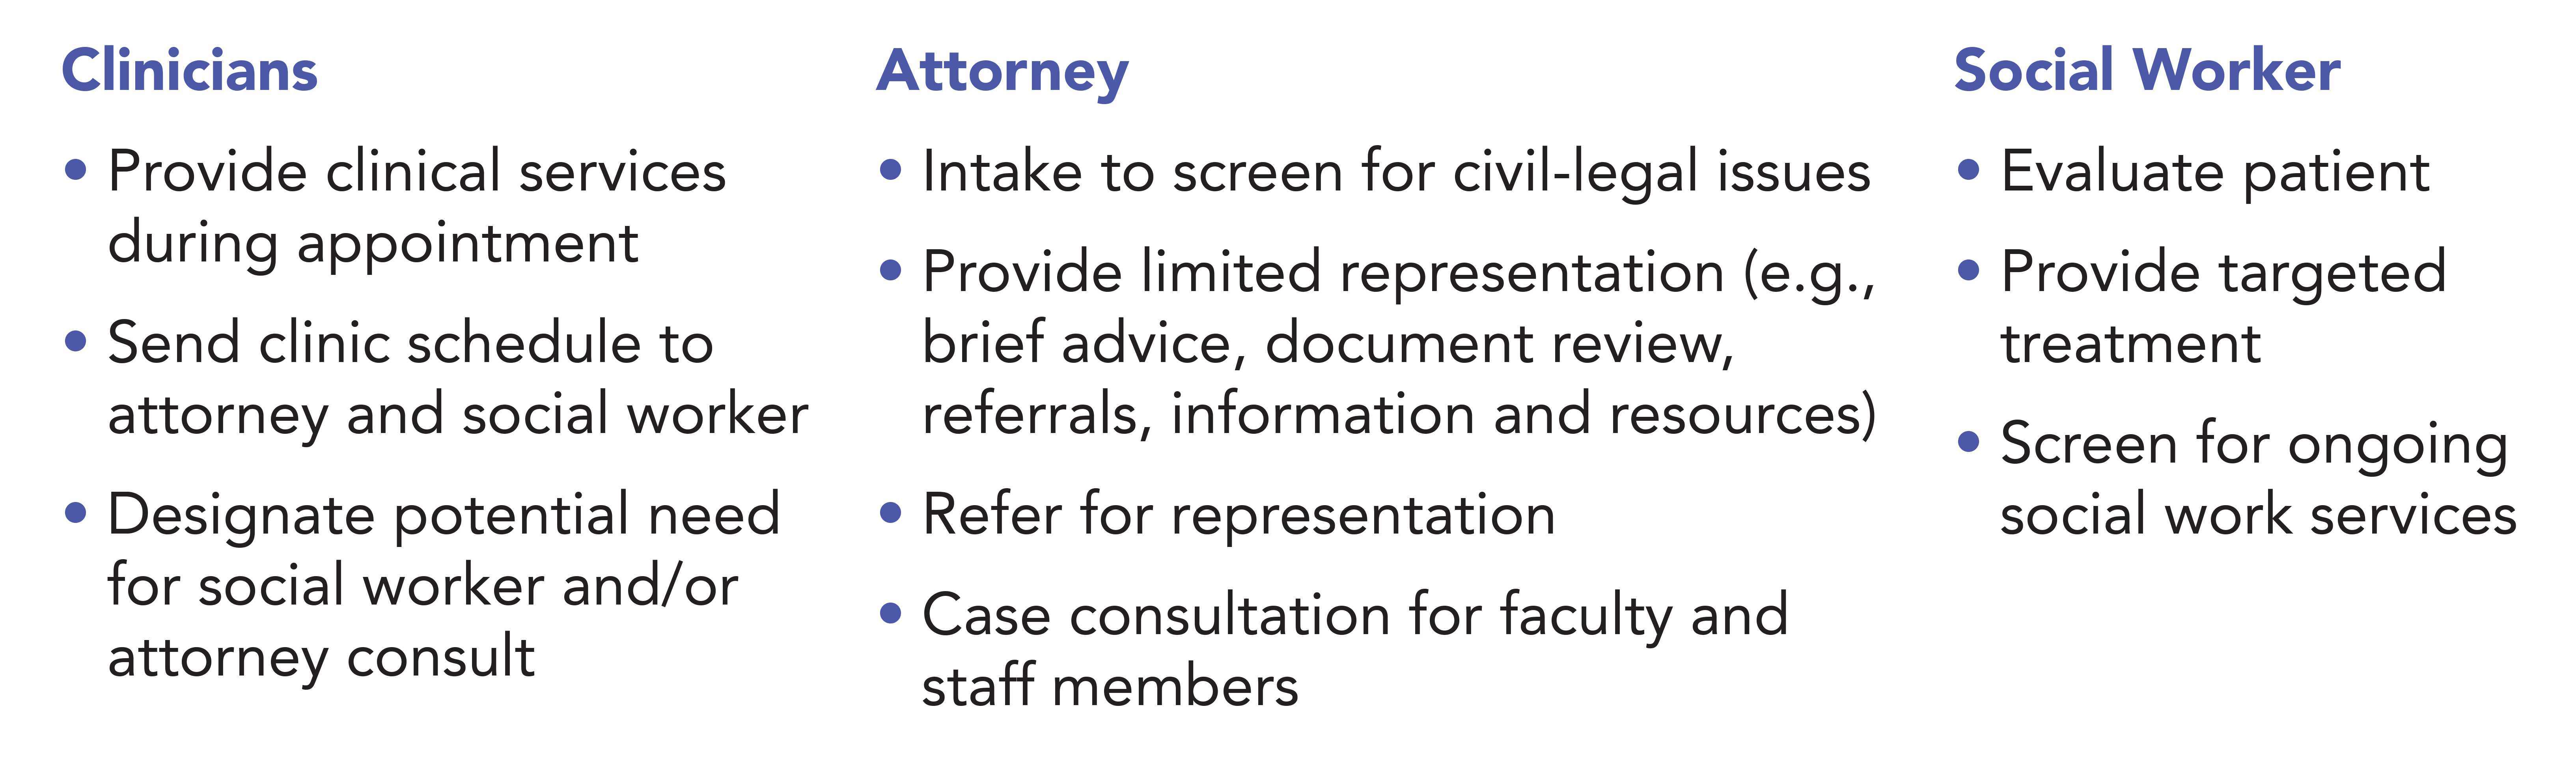 A chart describing the responsibilities of Clinicians, Attorneys and Social Worker